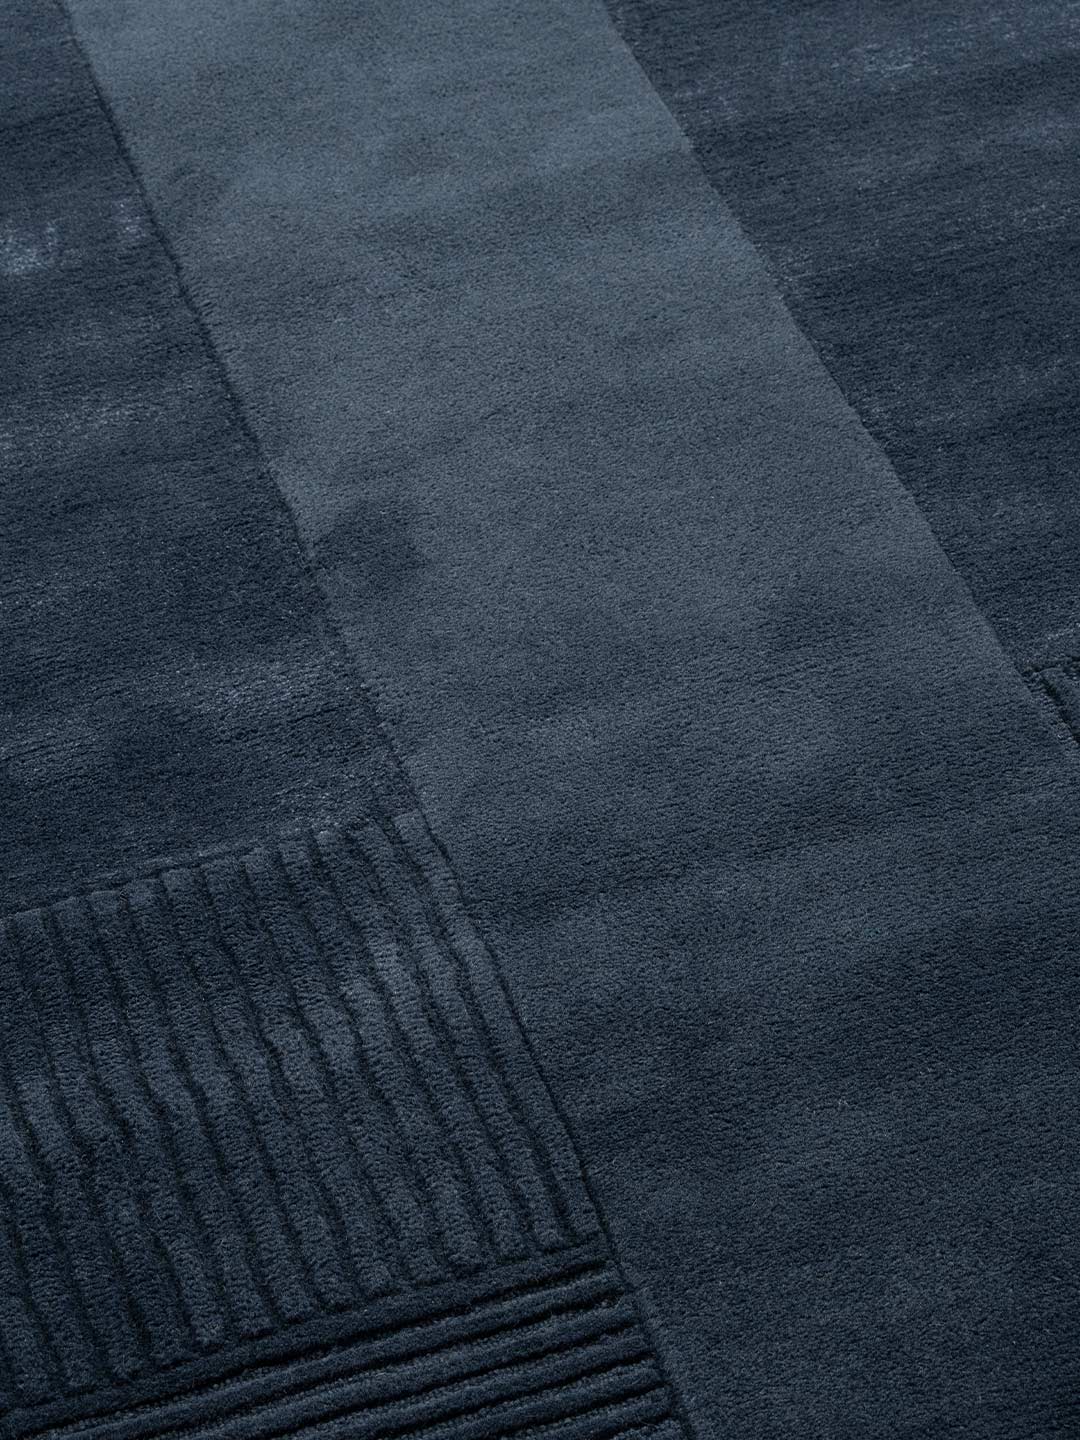 Foster Odyssey navy blue the rug collection detail image